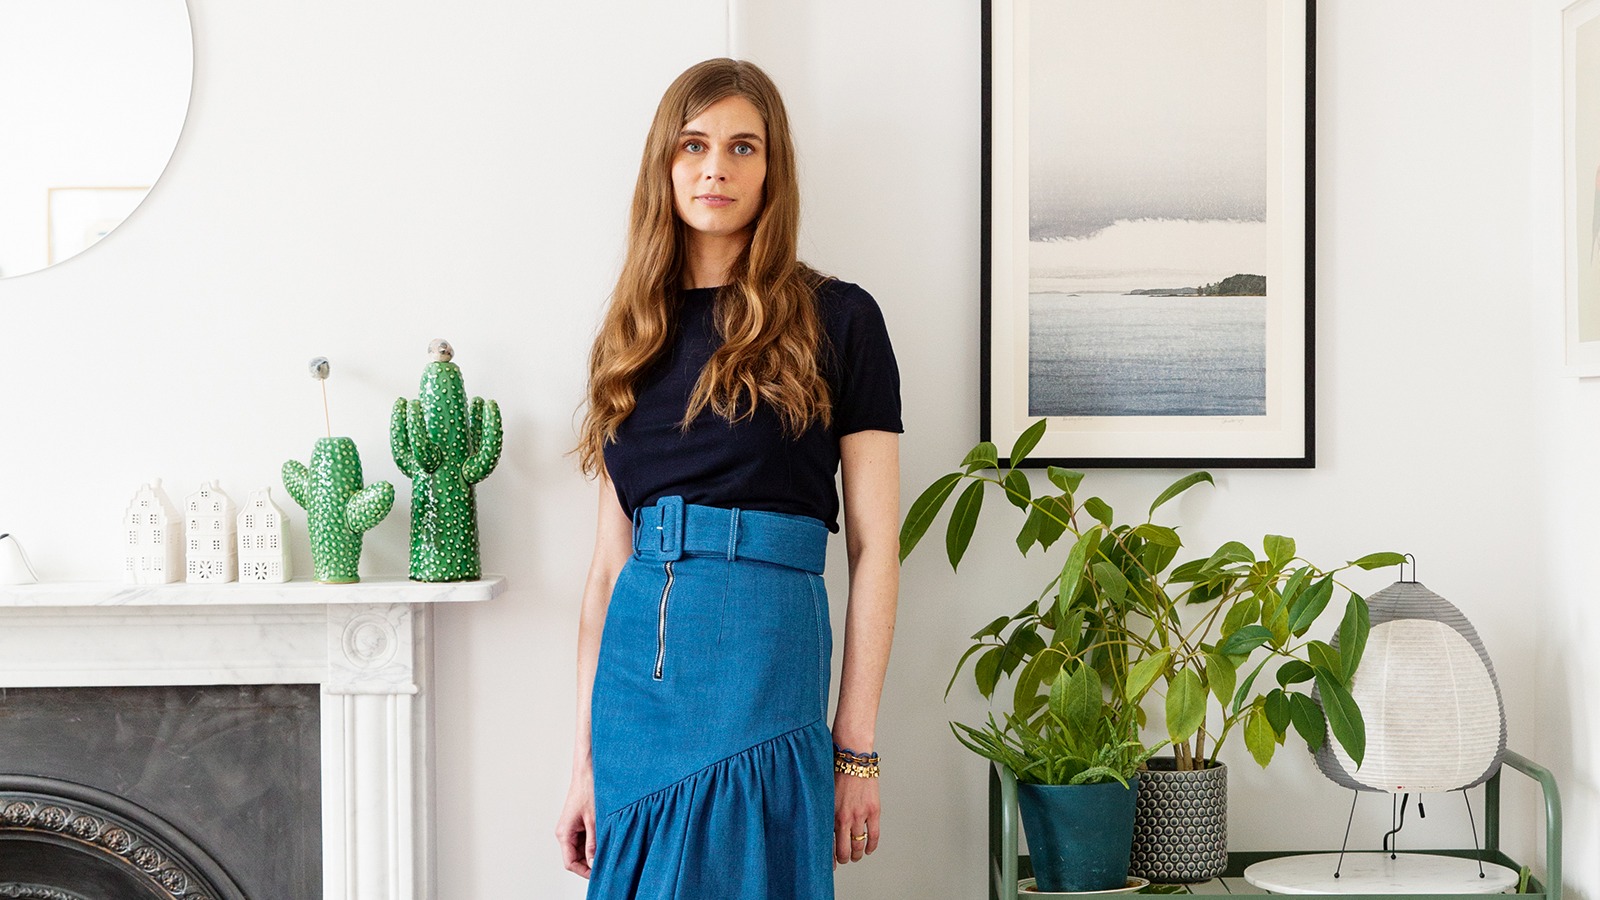 Designer Sophie Hulme on gold charms, woodblock prints and knitted